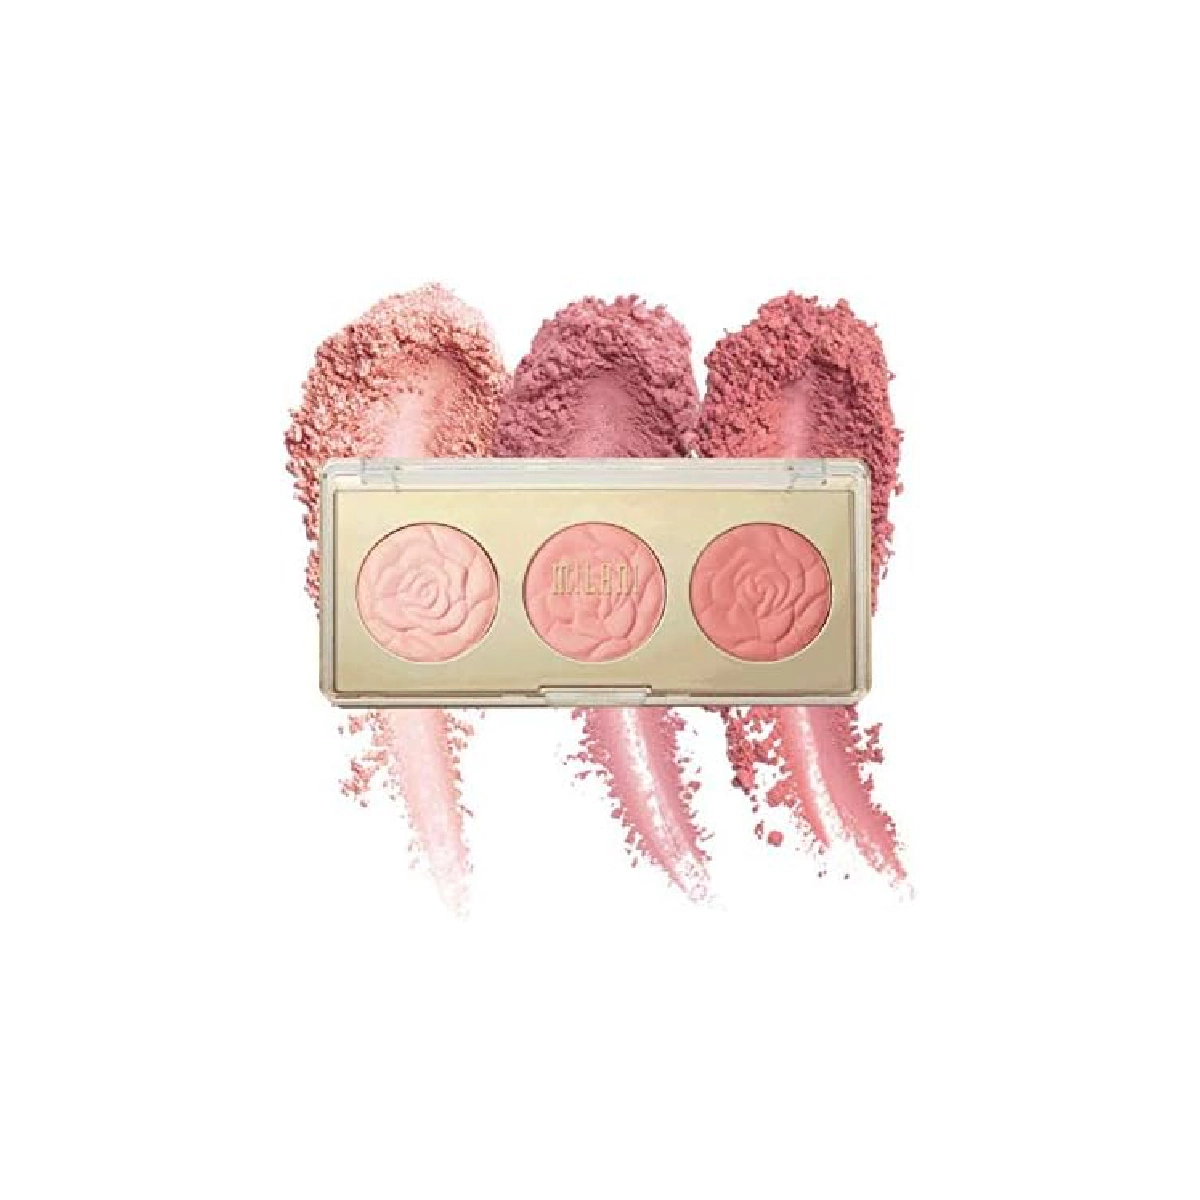 Milani Rose Powder Blush Palette - a blush palette featuring rose-inspired shades on a white background.